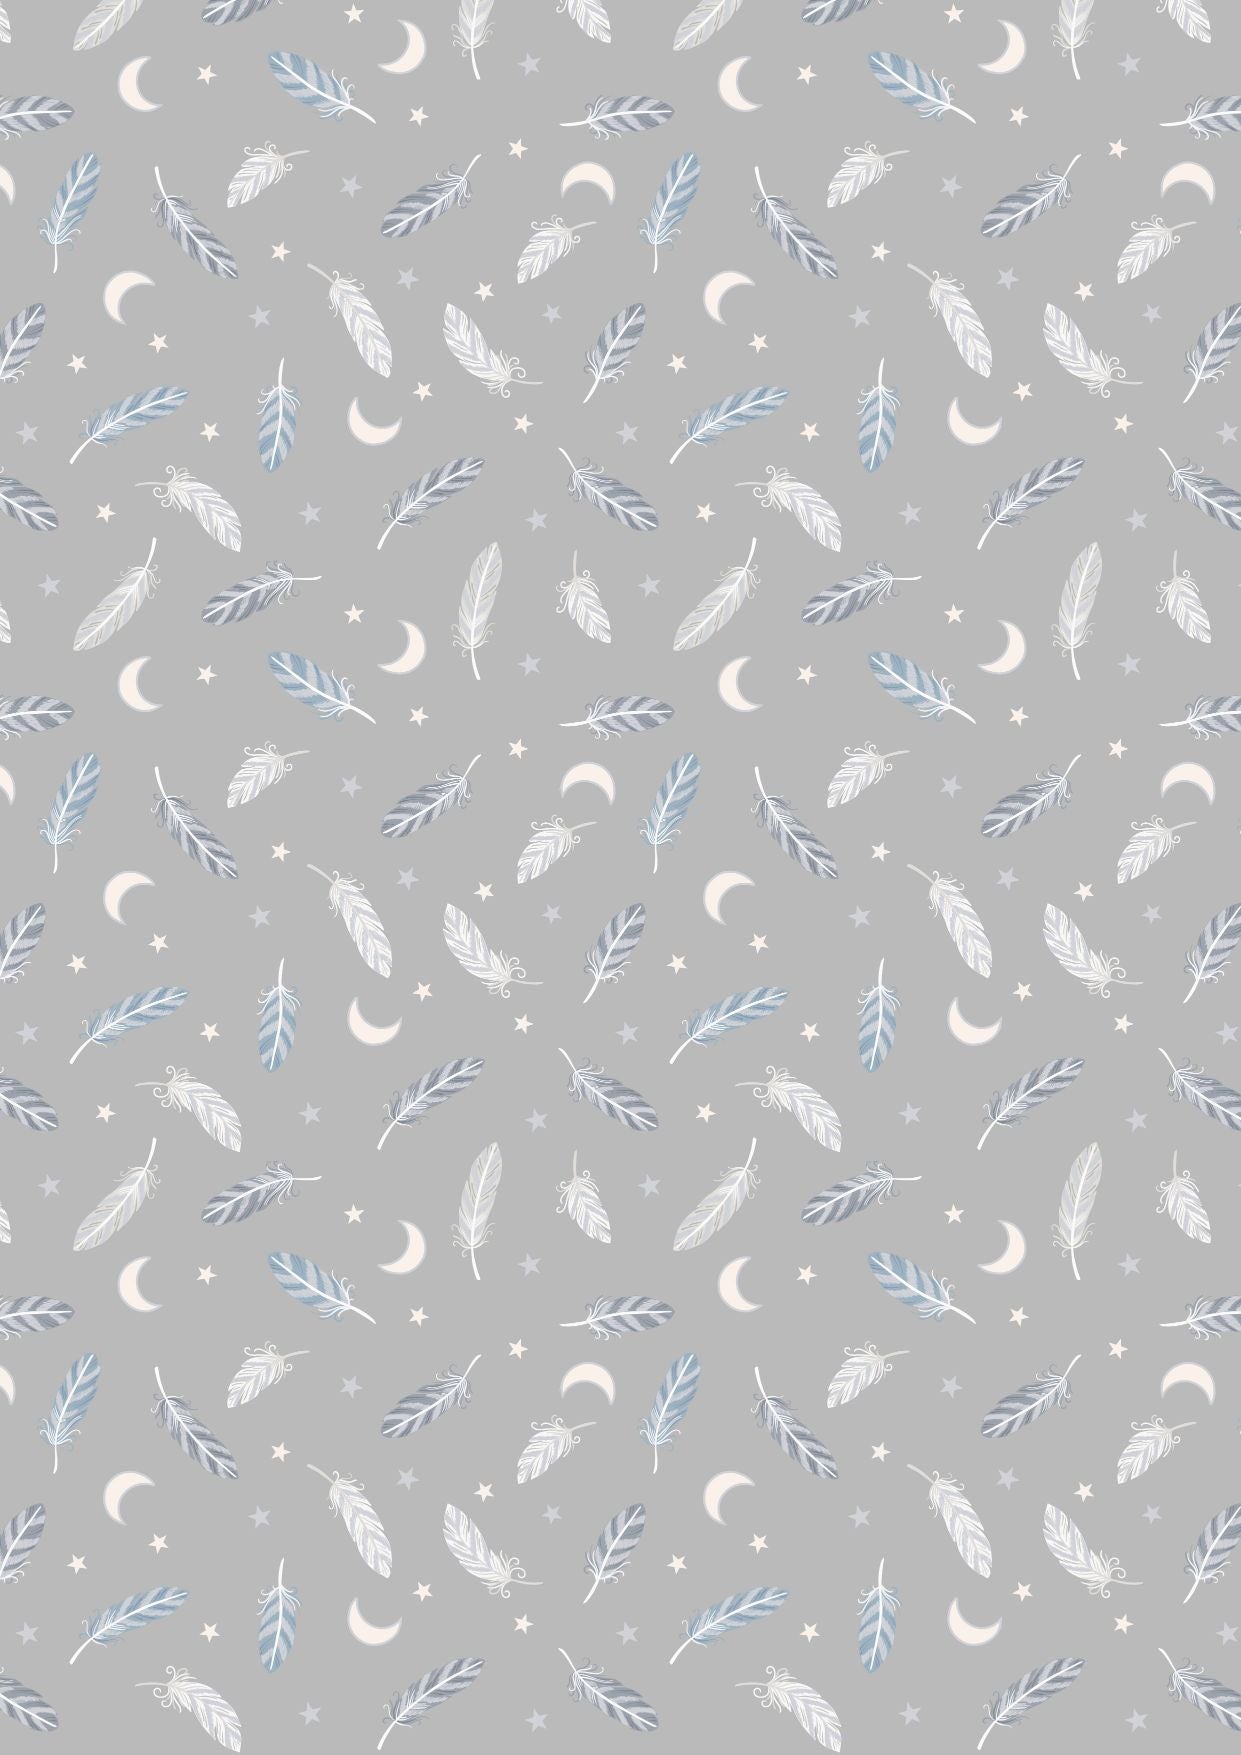 Enchanted by Lewis and Irene - Feathers and Stars on Grey - Metallic $21.96/m